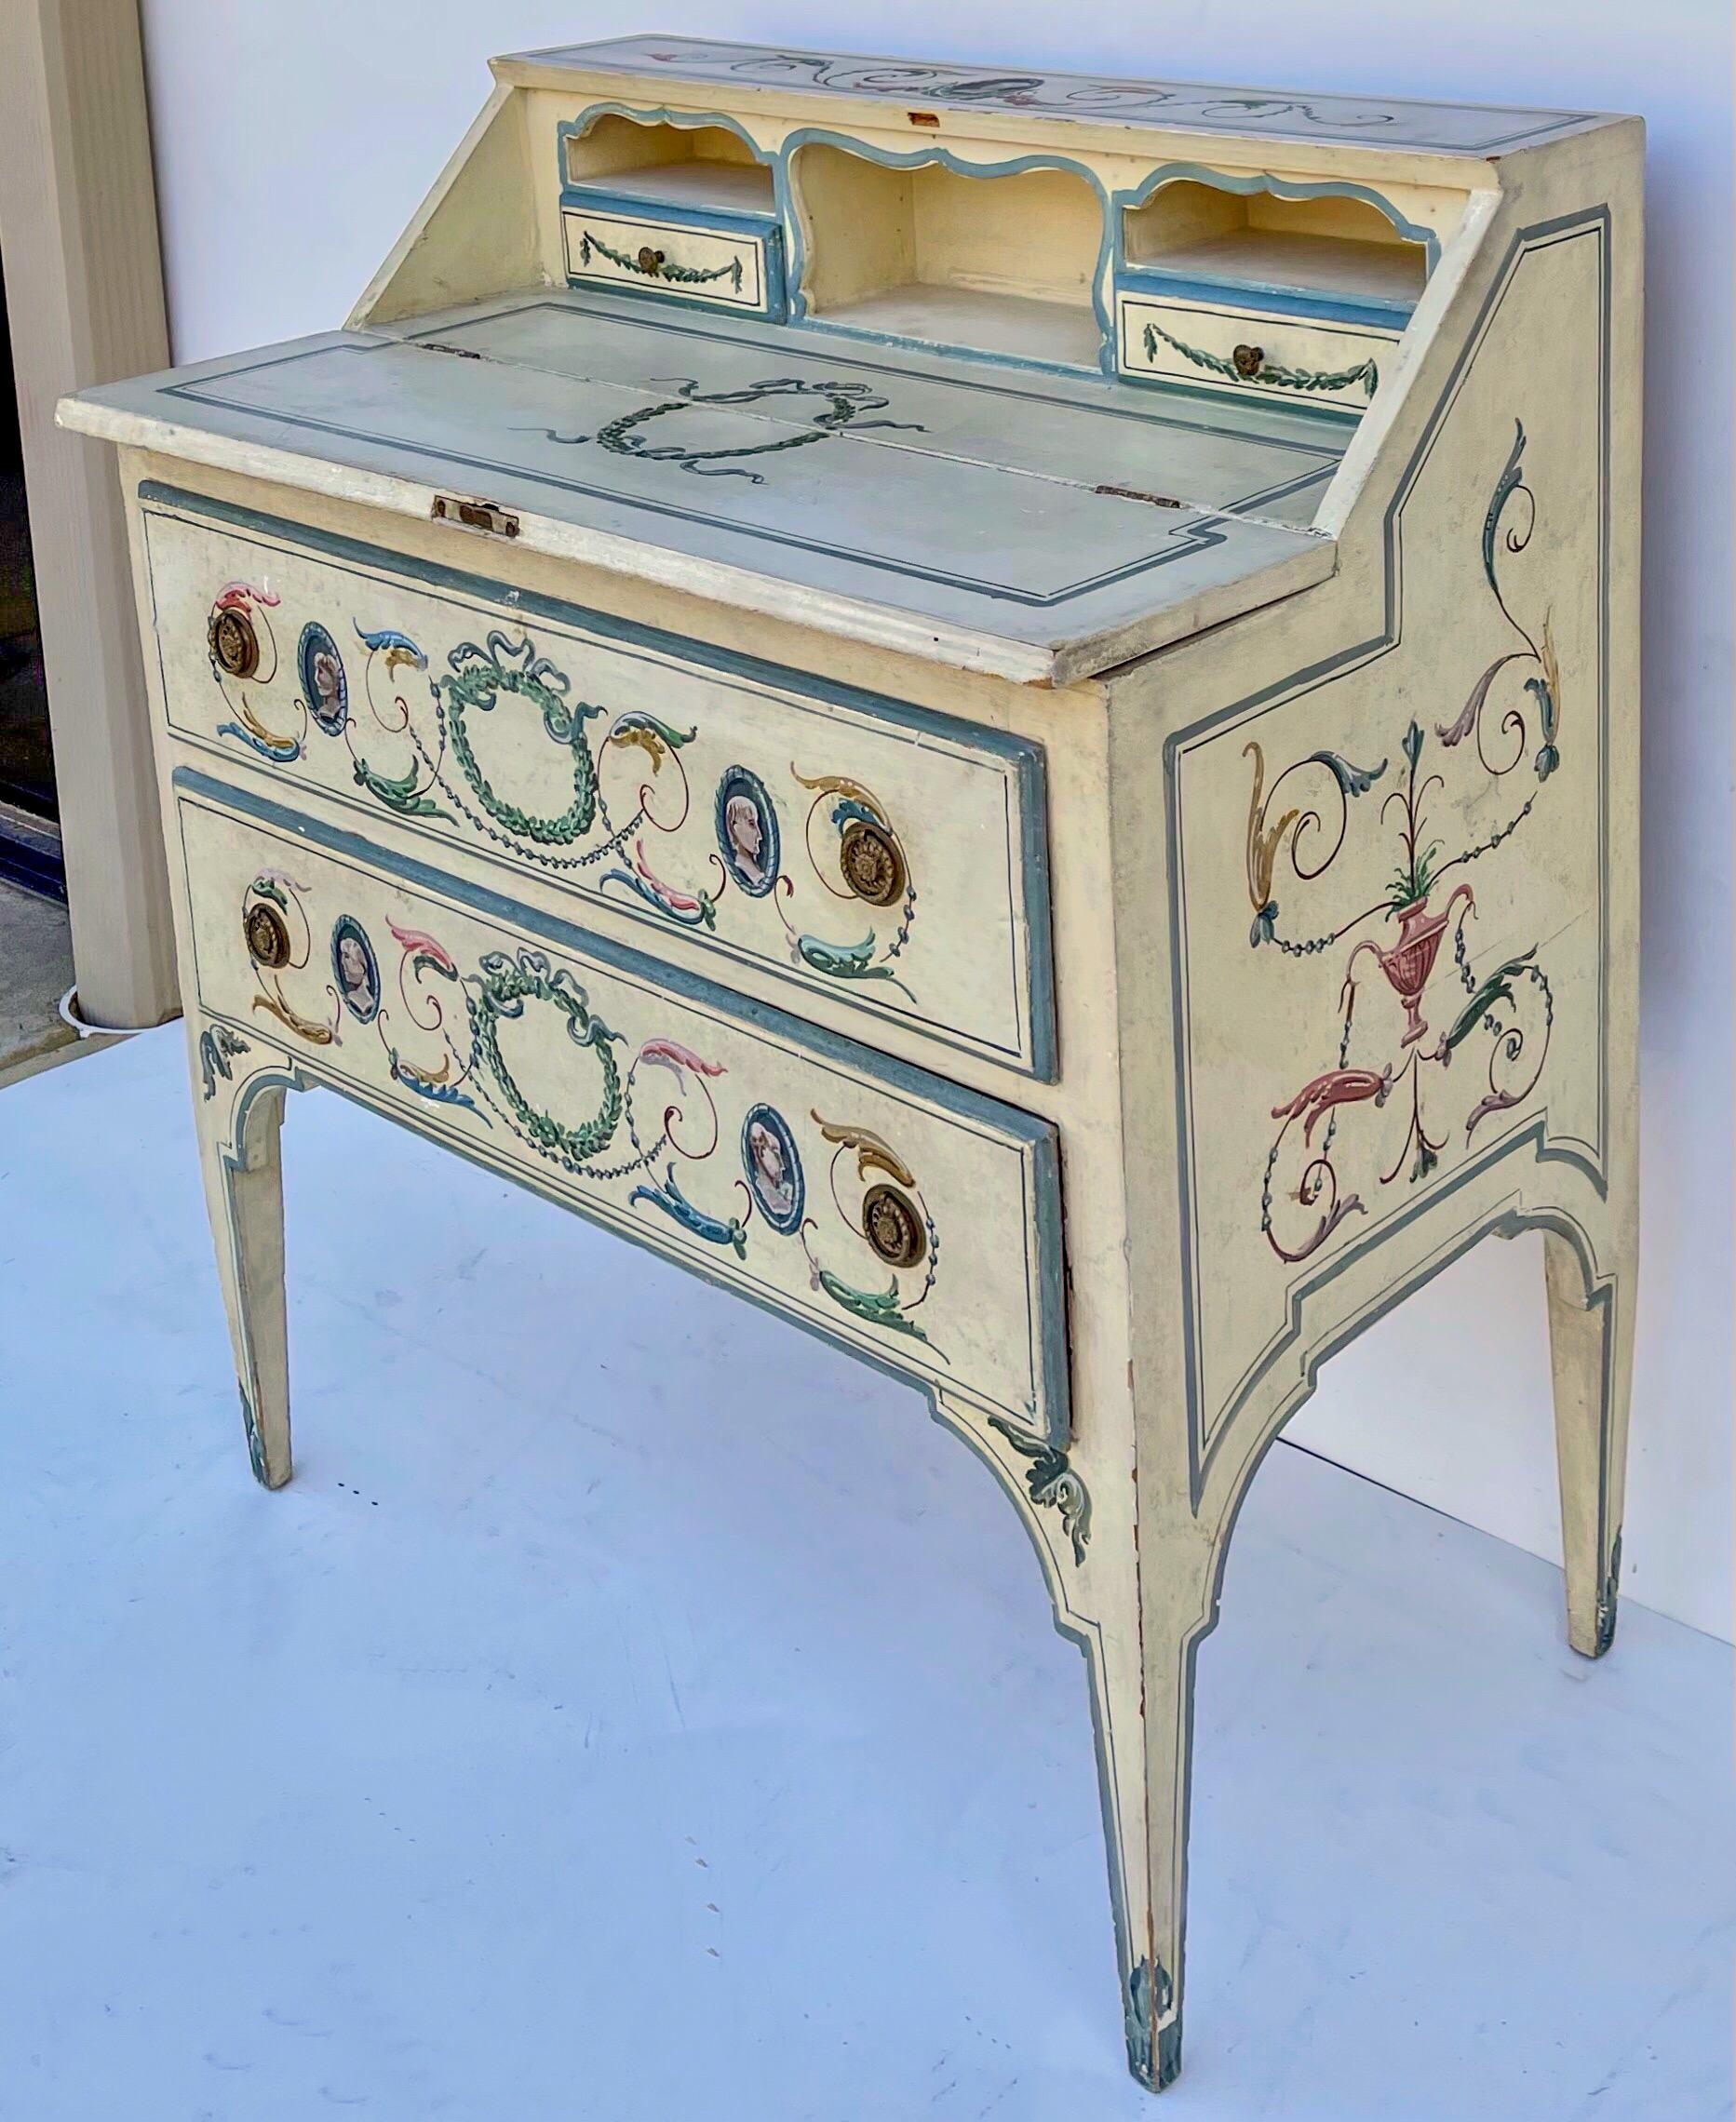 This is a wonderful piece. It is an early Venetian neo-classical style secretary desk with original paint. It does have the key. It has painted greco-roman portraiture and foliate throughout the body and interior.